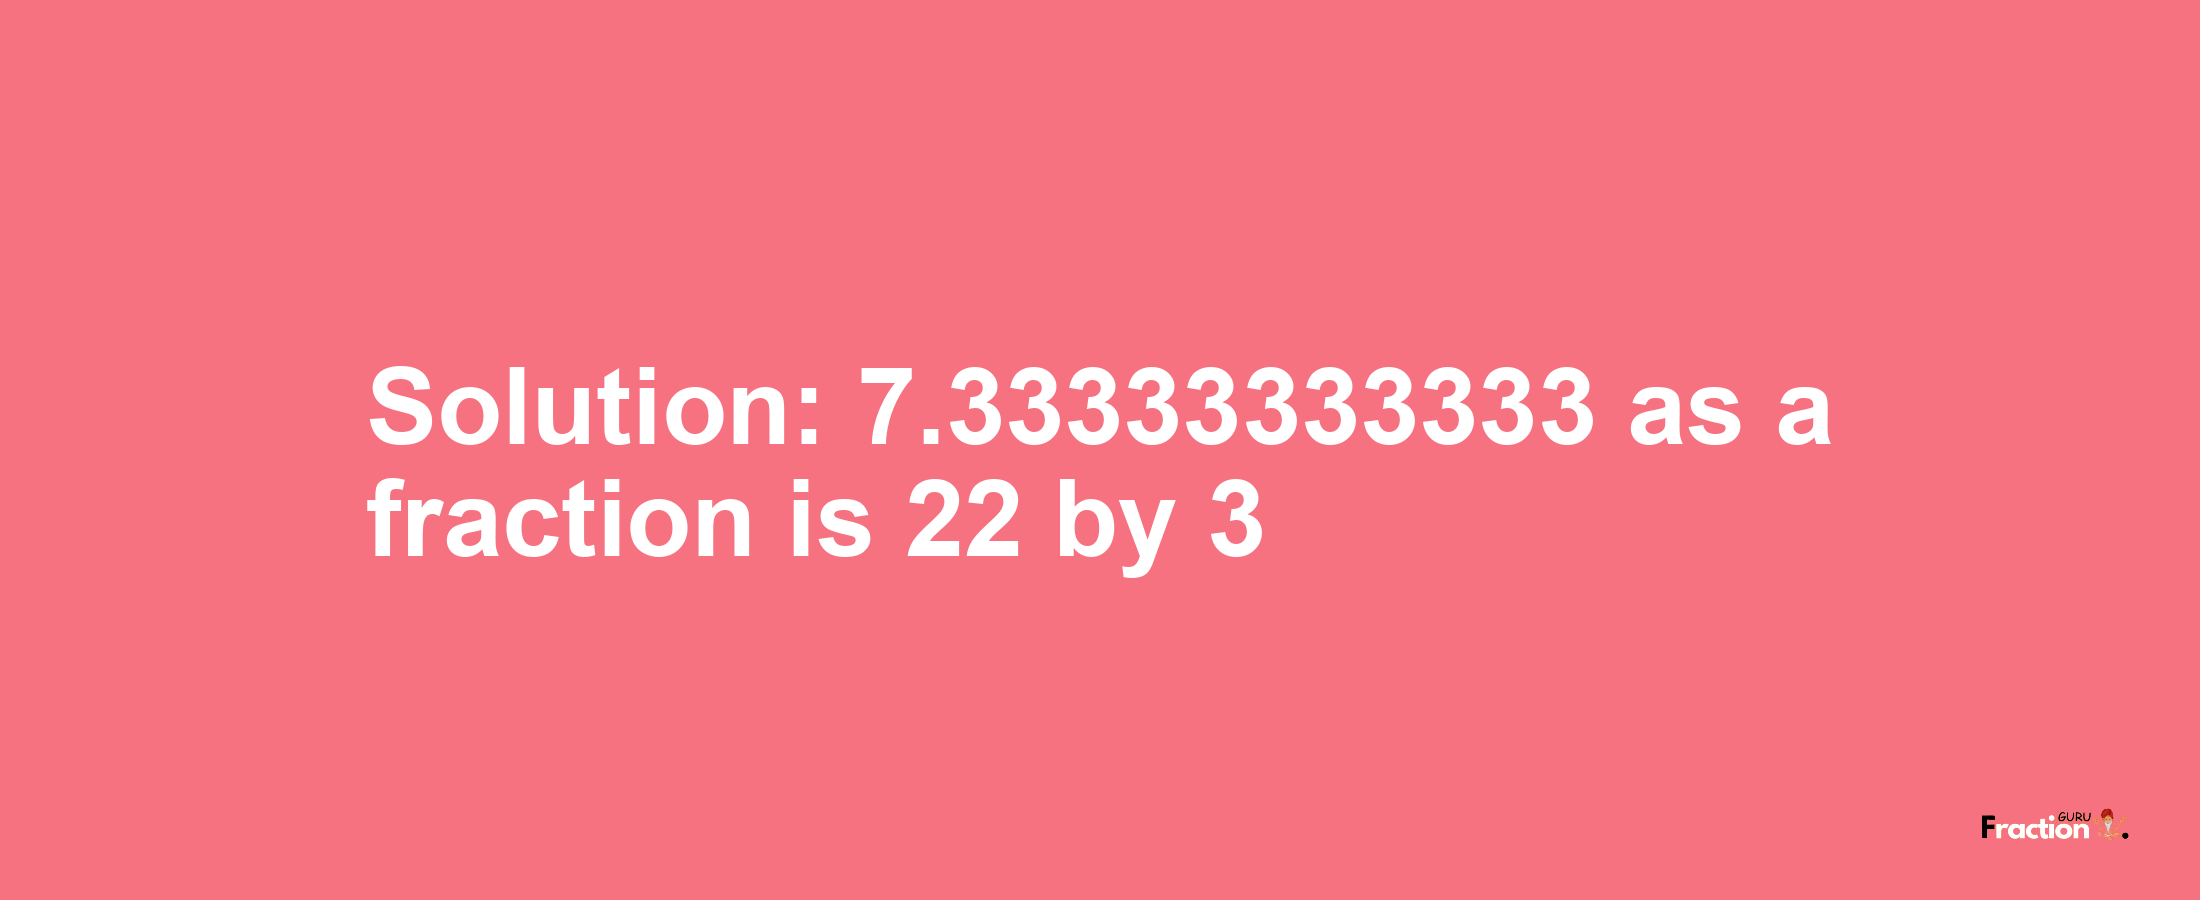 Solution:7.33333333333 as a fraction is 22/3